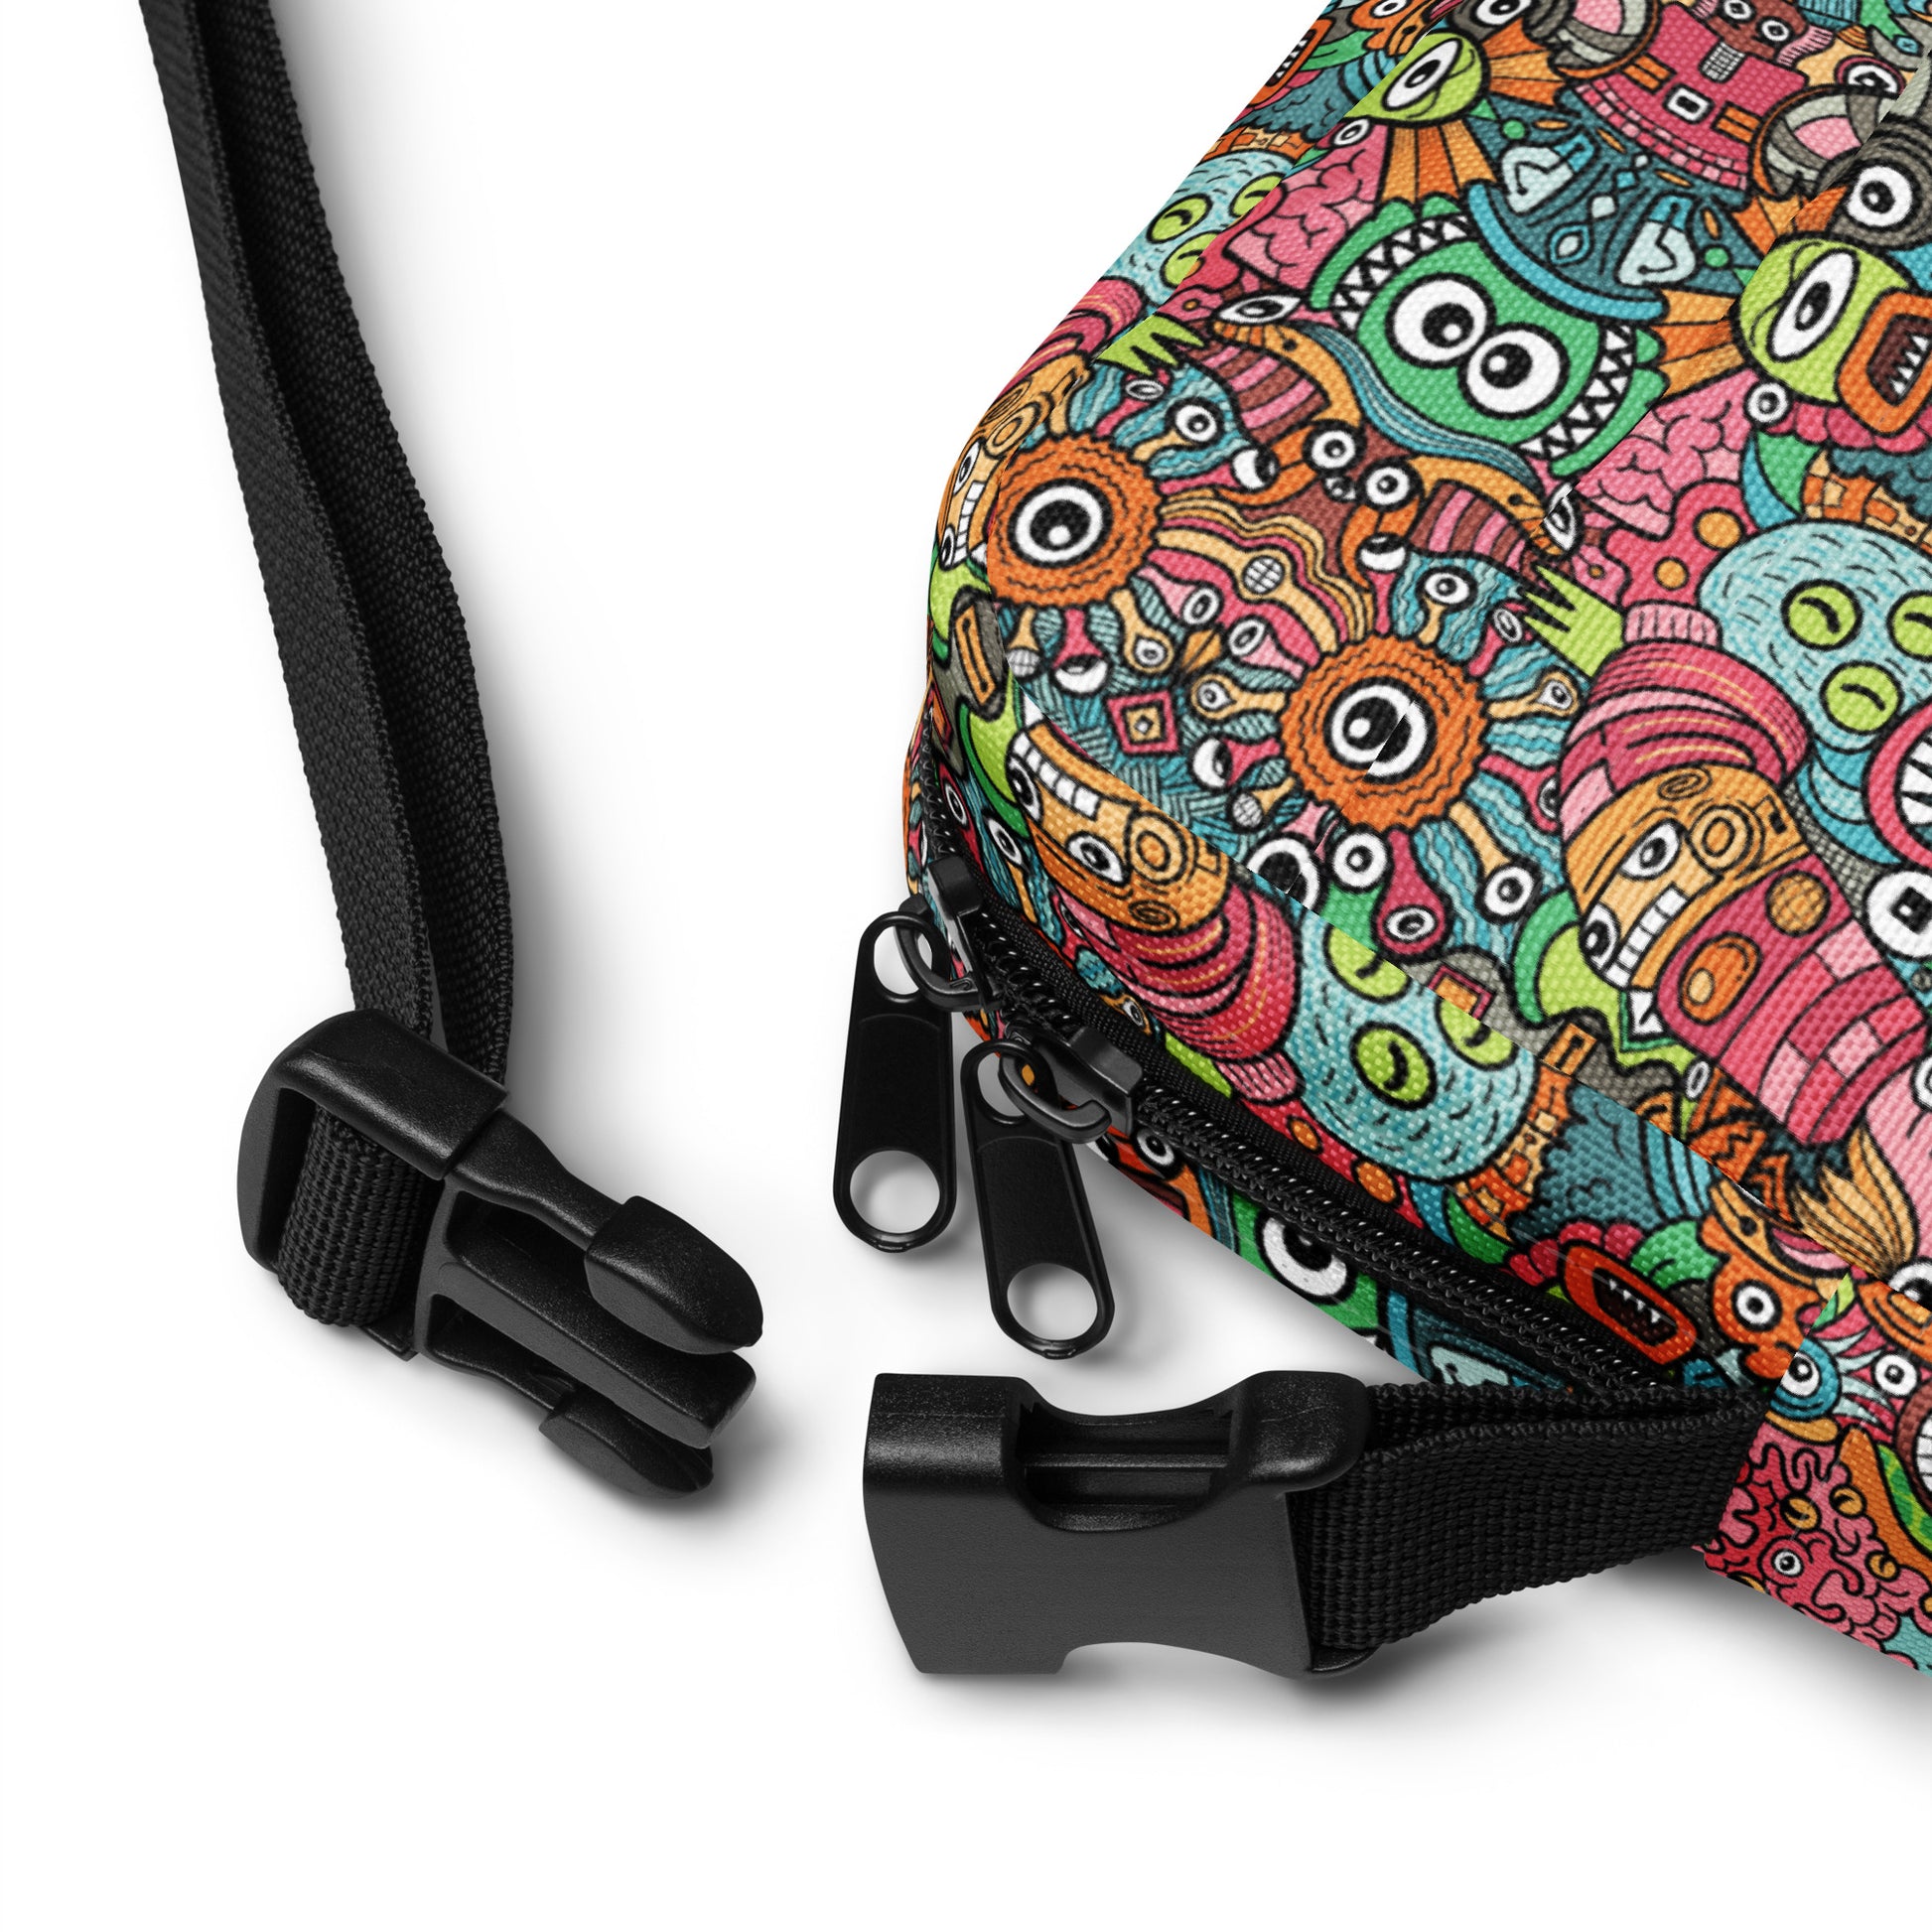 Robot Odyssey: A High-Tech Adventure with Quirky Bots - Utility crossbody bag. Product details